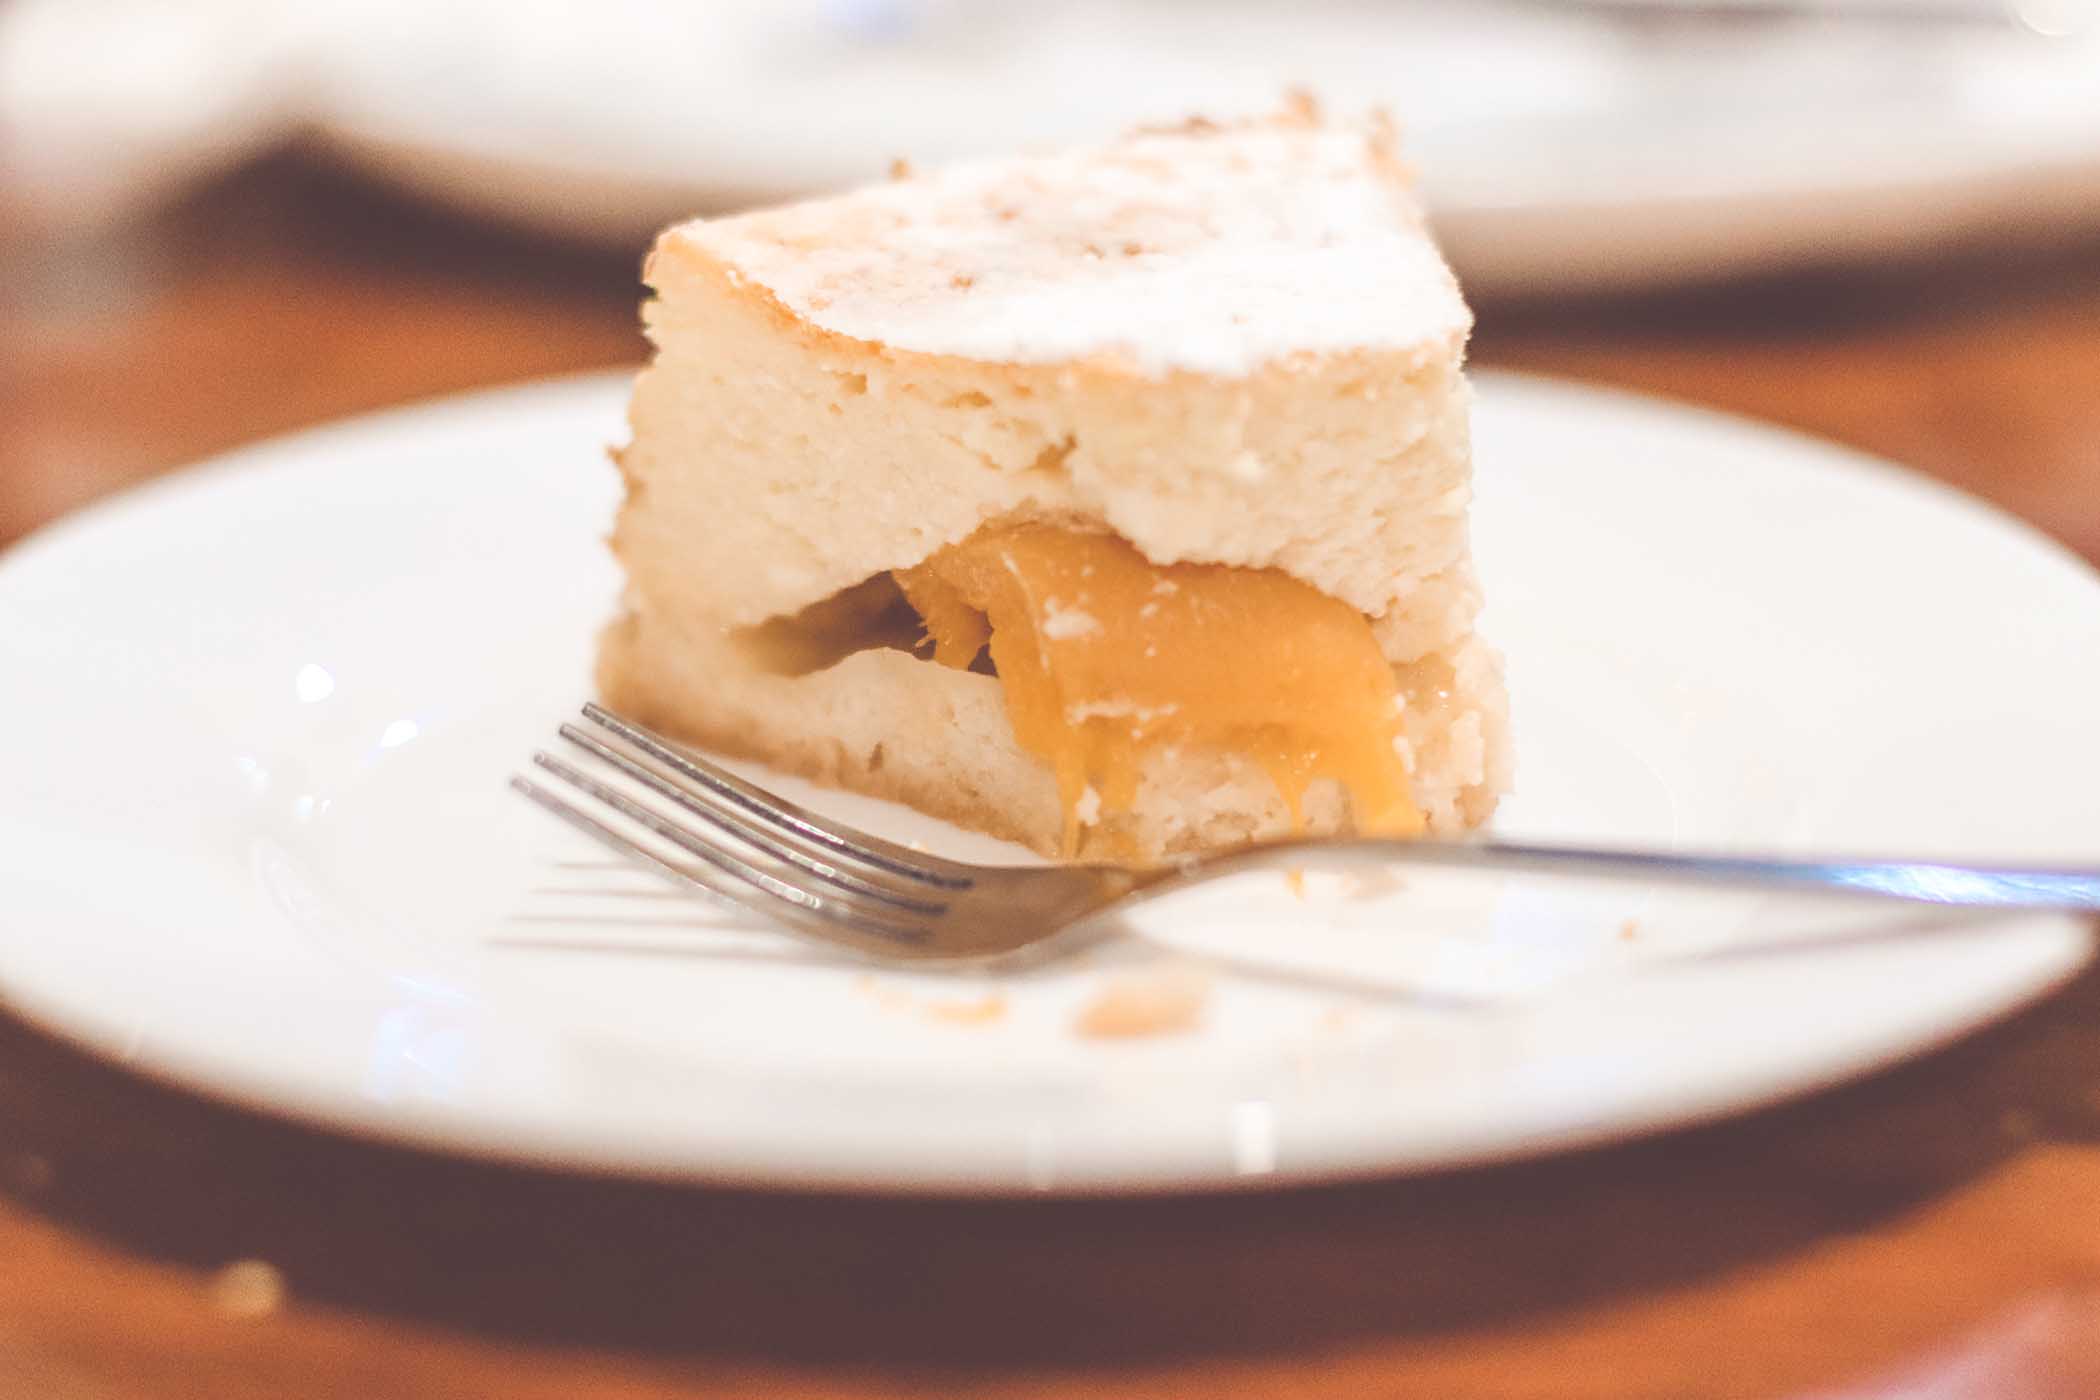 Peach cheesecake from a bistro